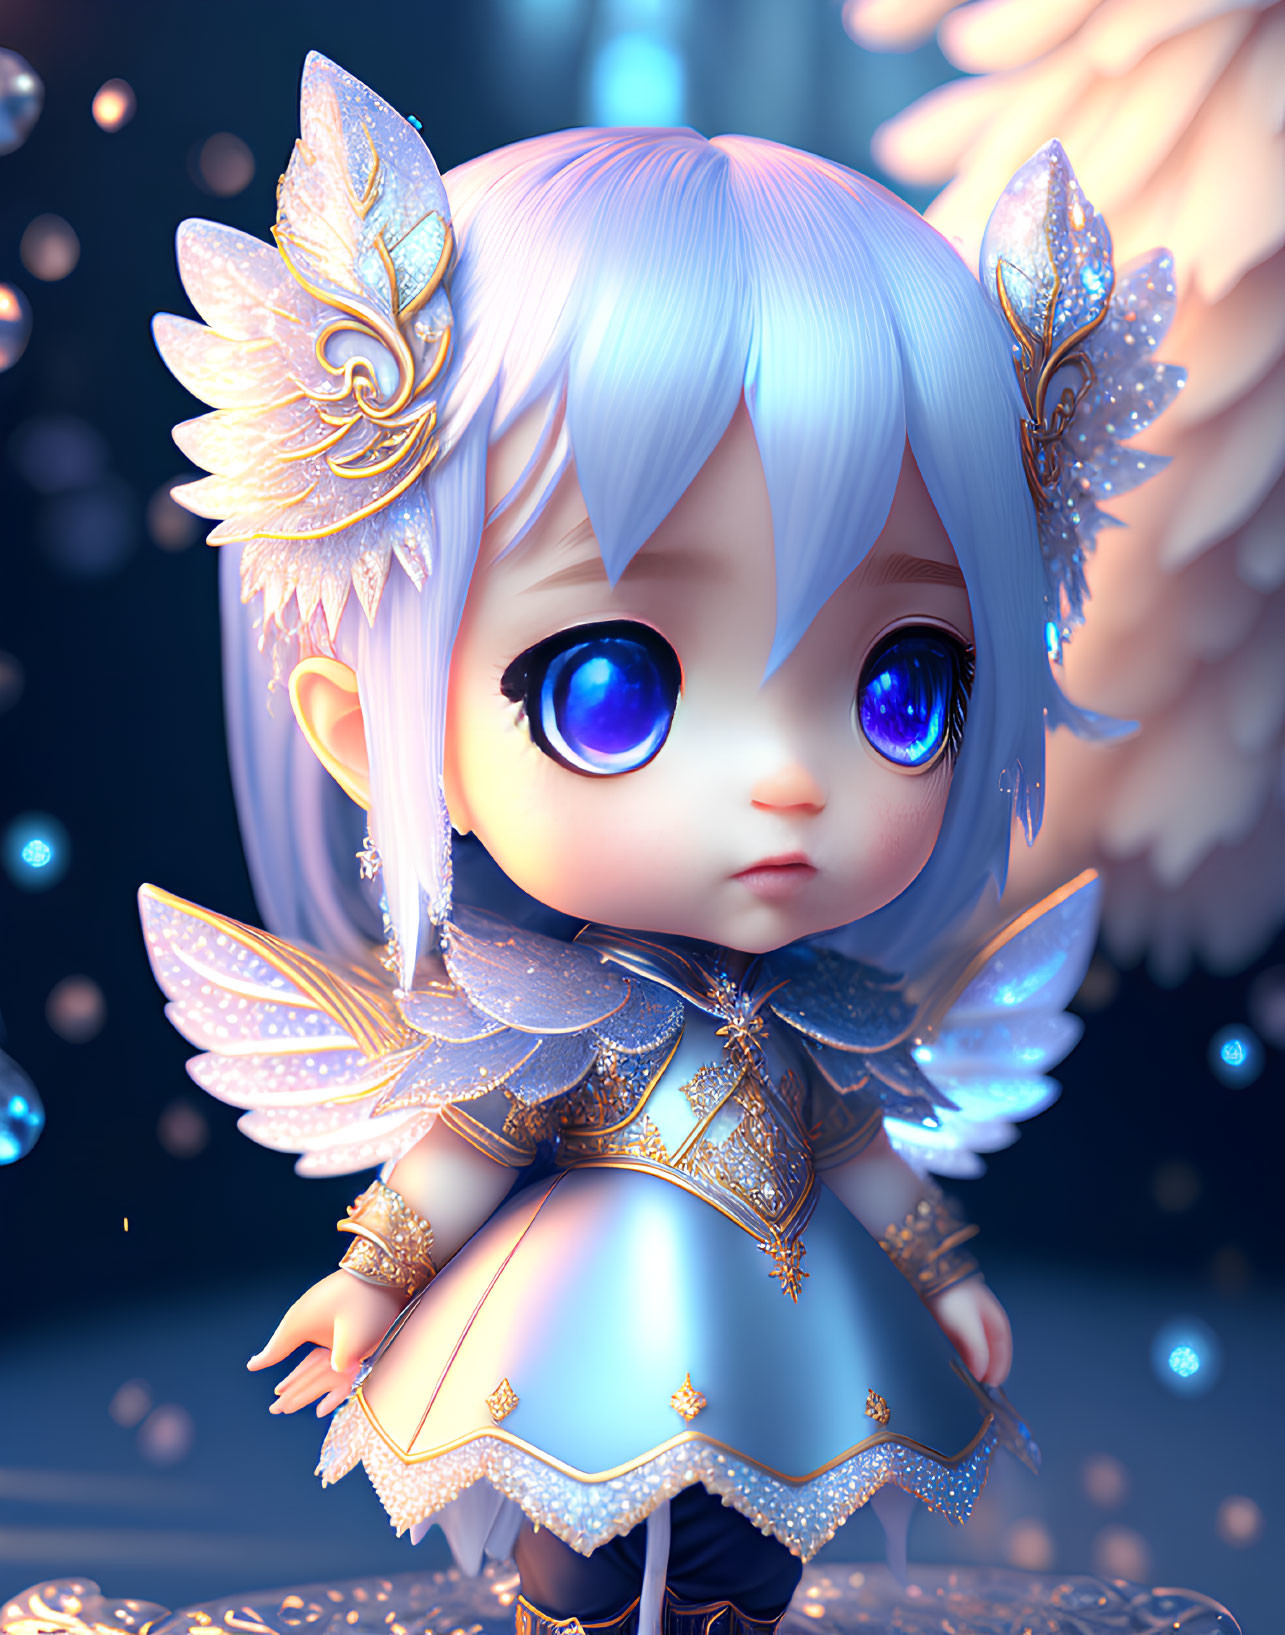 Adorable Chibi-Style Character with Purple Hair and Fairy Wings